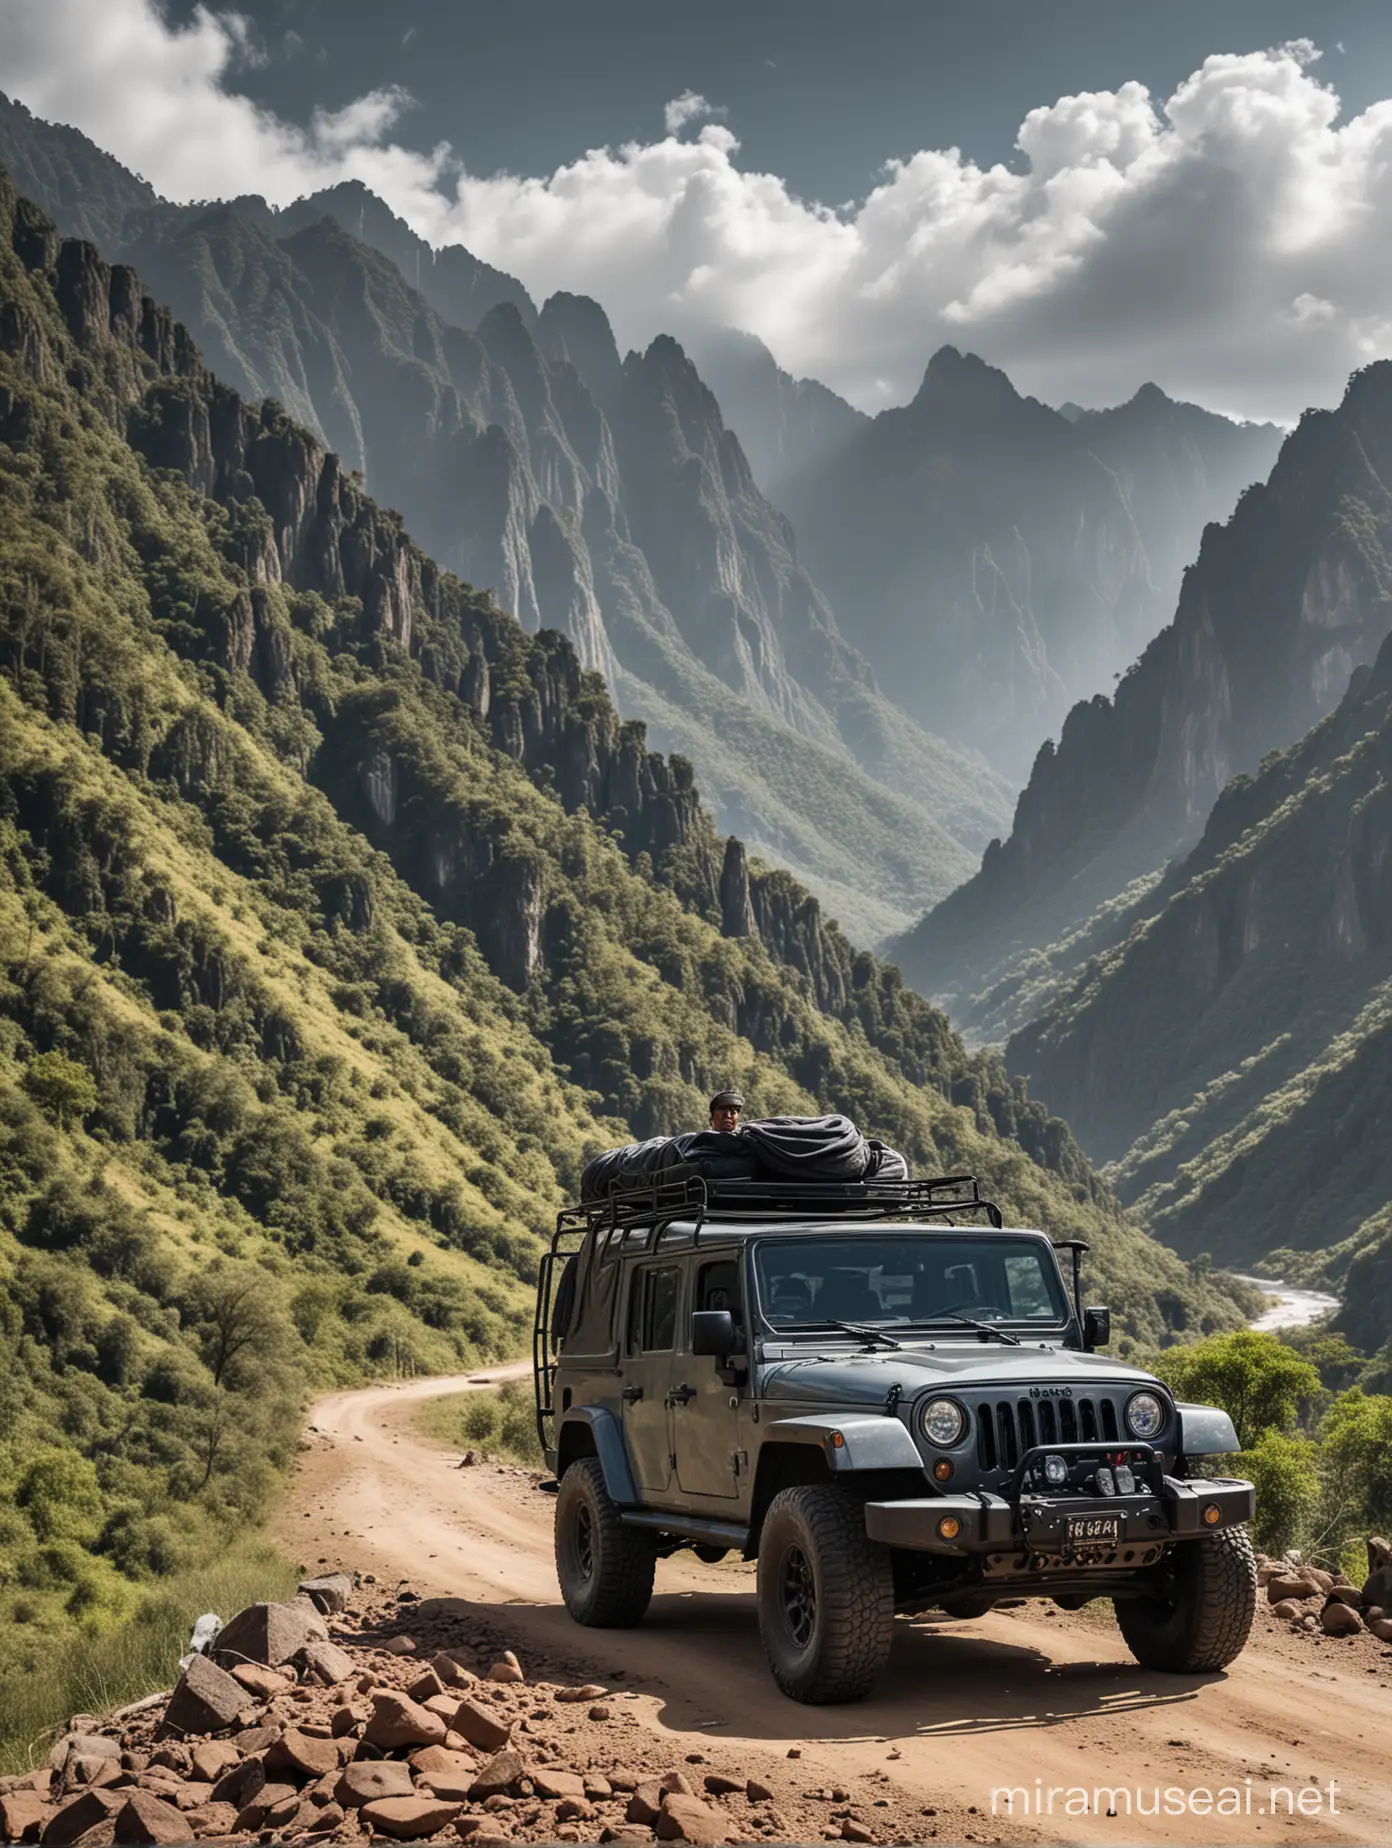 Indonesian Man in Gray Shirt Standing Near Black Jeep Amid Mountain Views HDR extreme